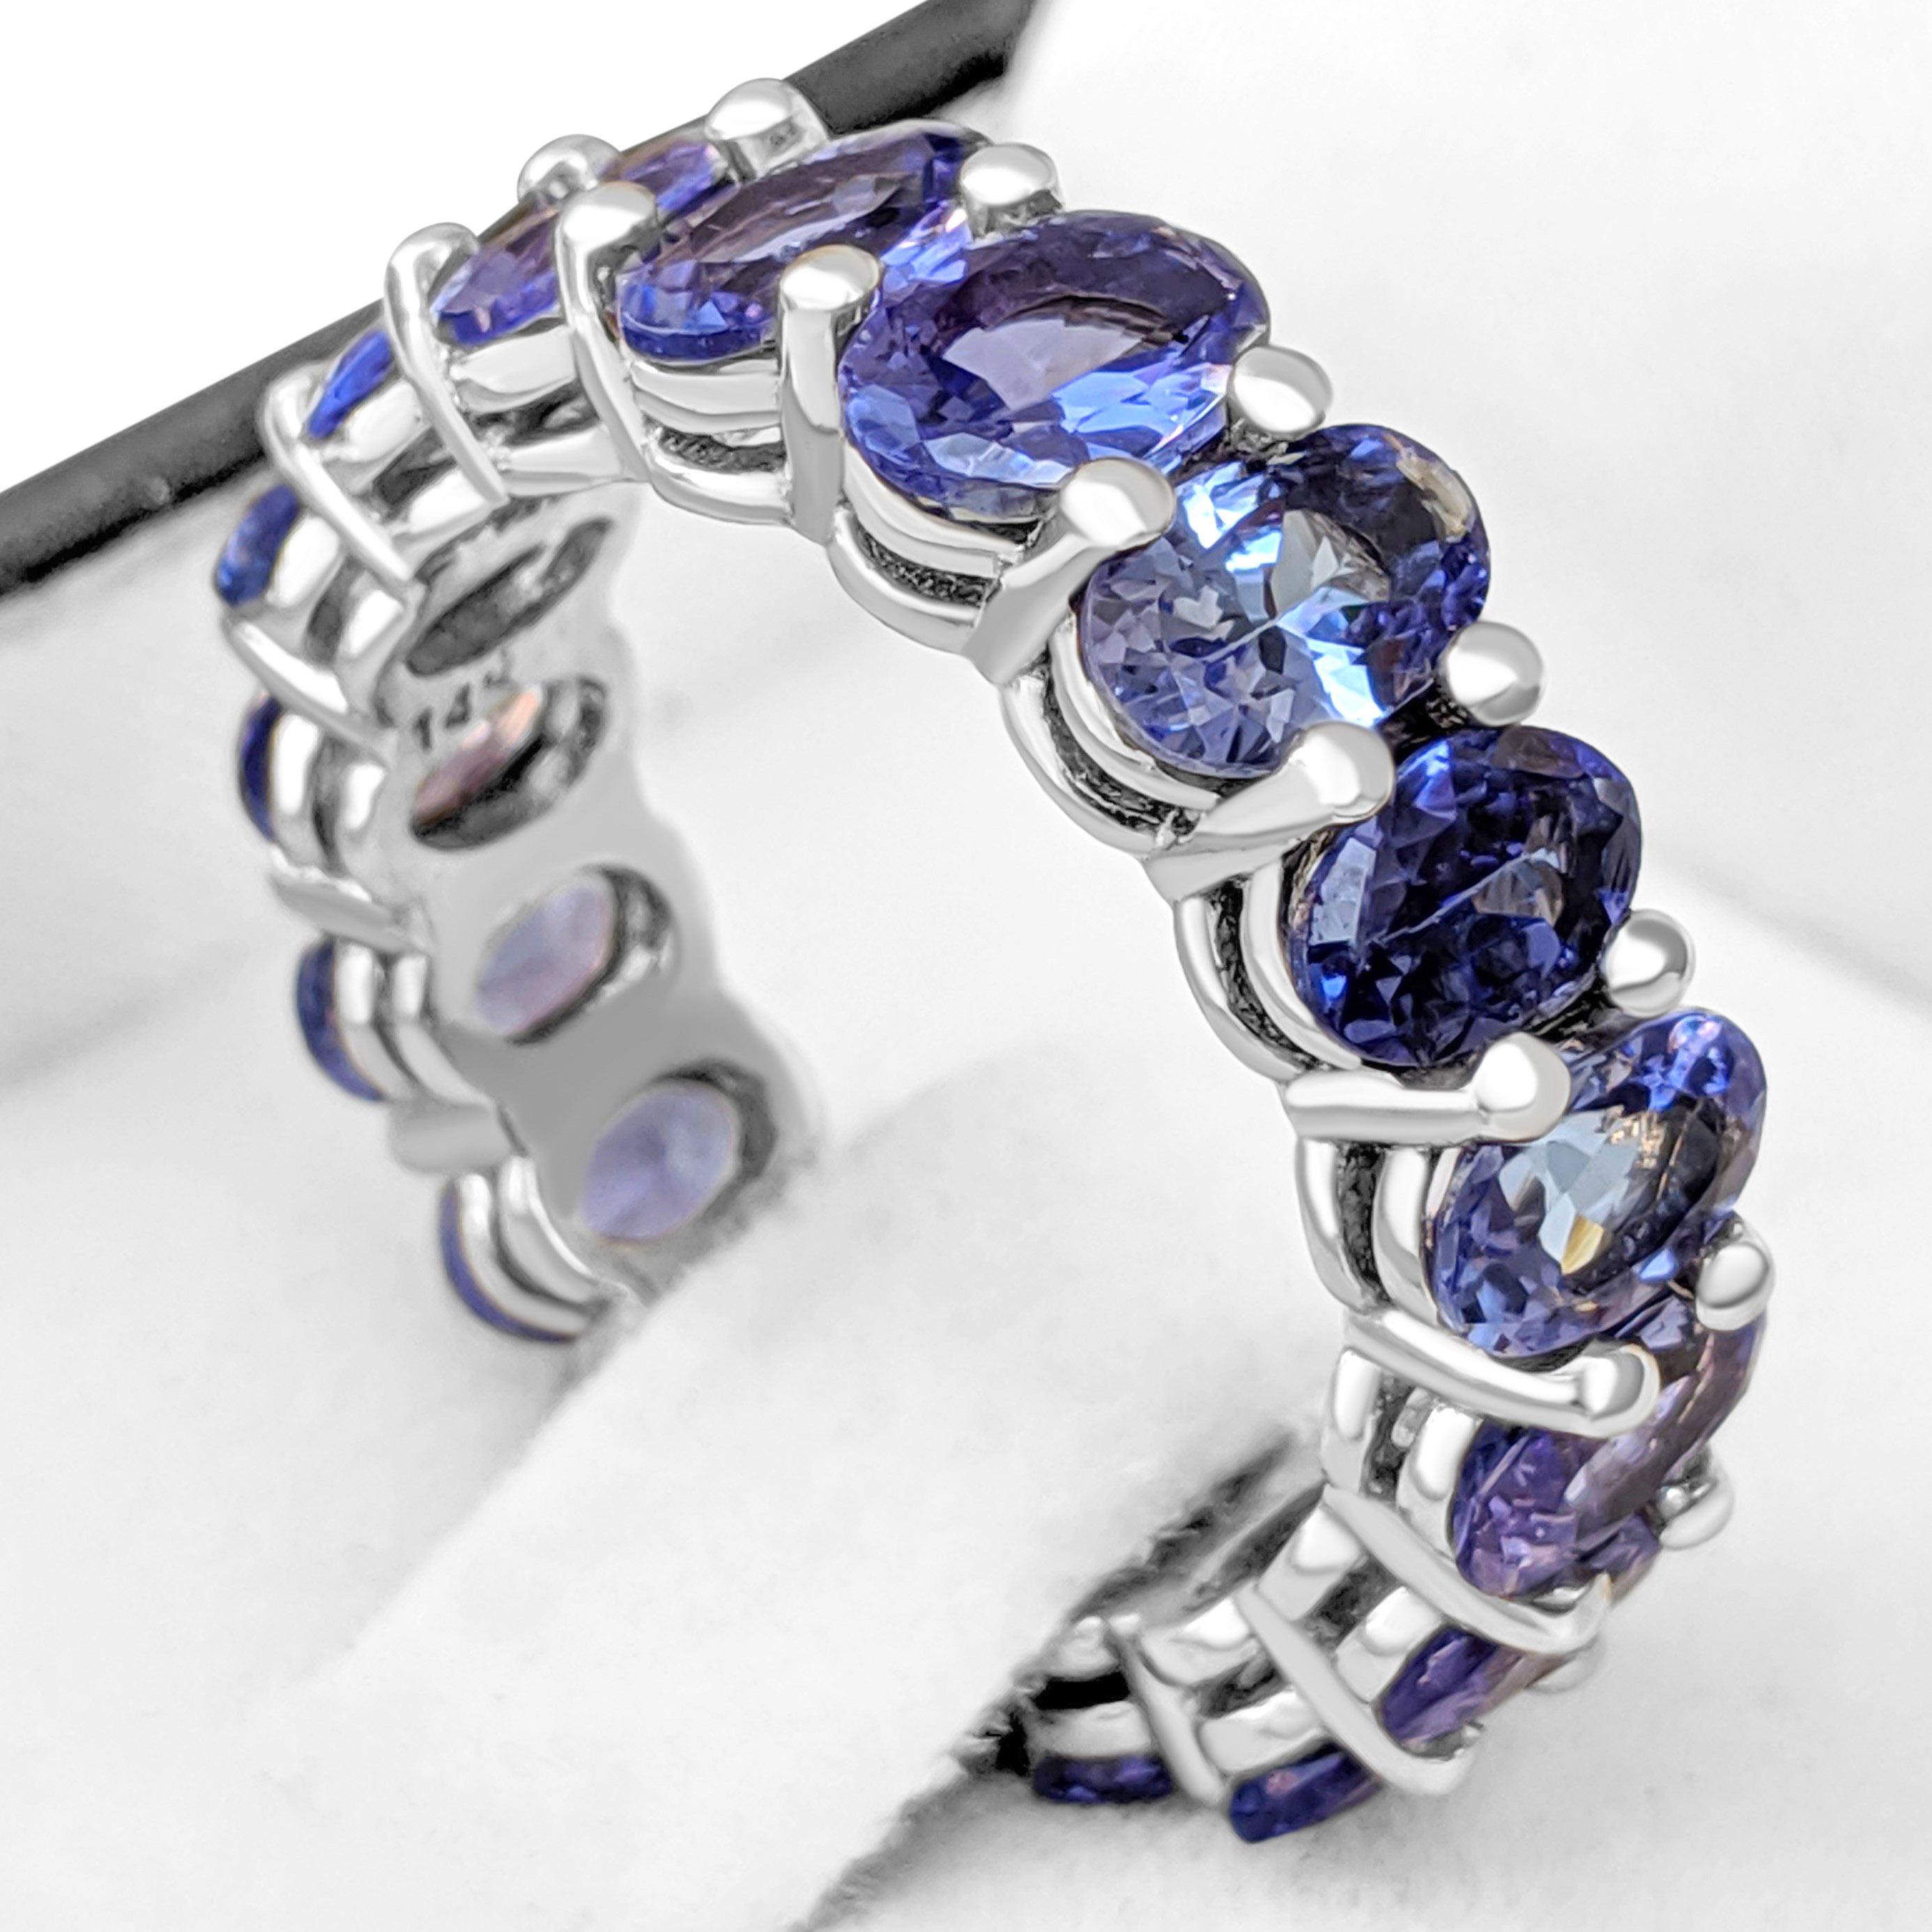 Oval Cut $1 NO RESERVE!  6.73cttw Natural Tanzanite Eternity Band - 14k White Gold 